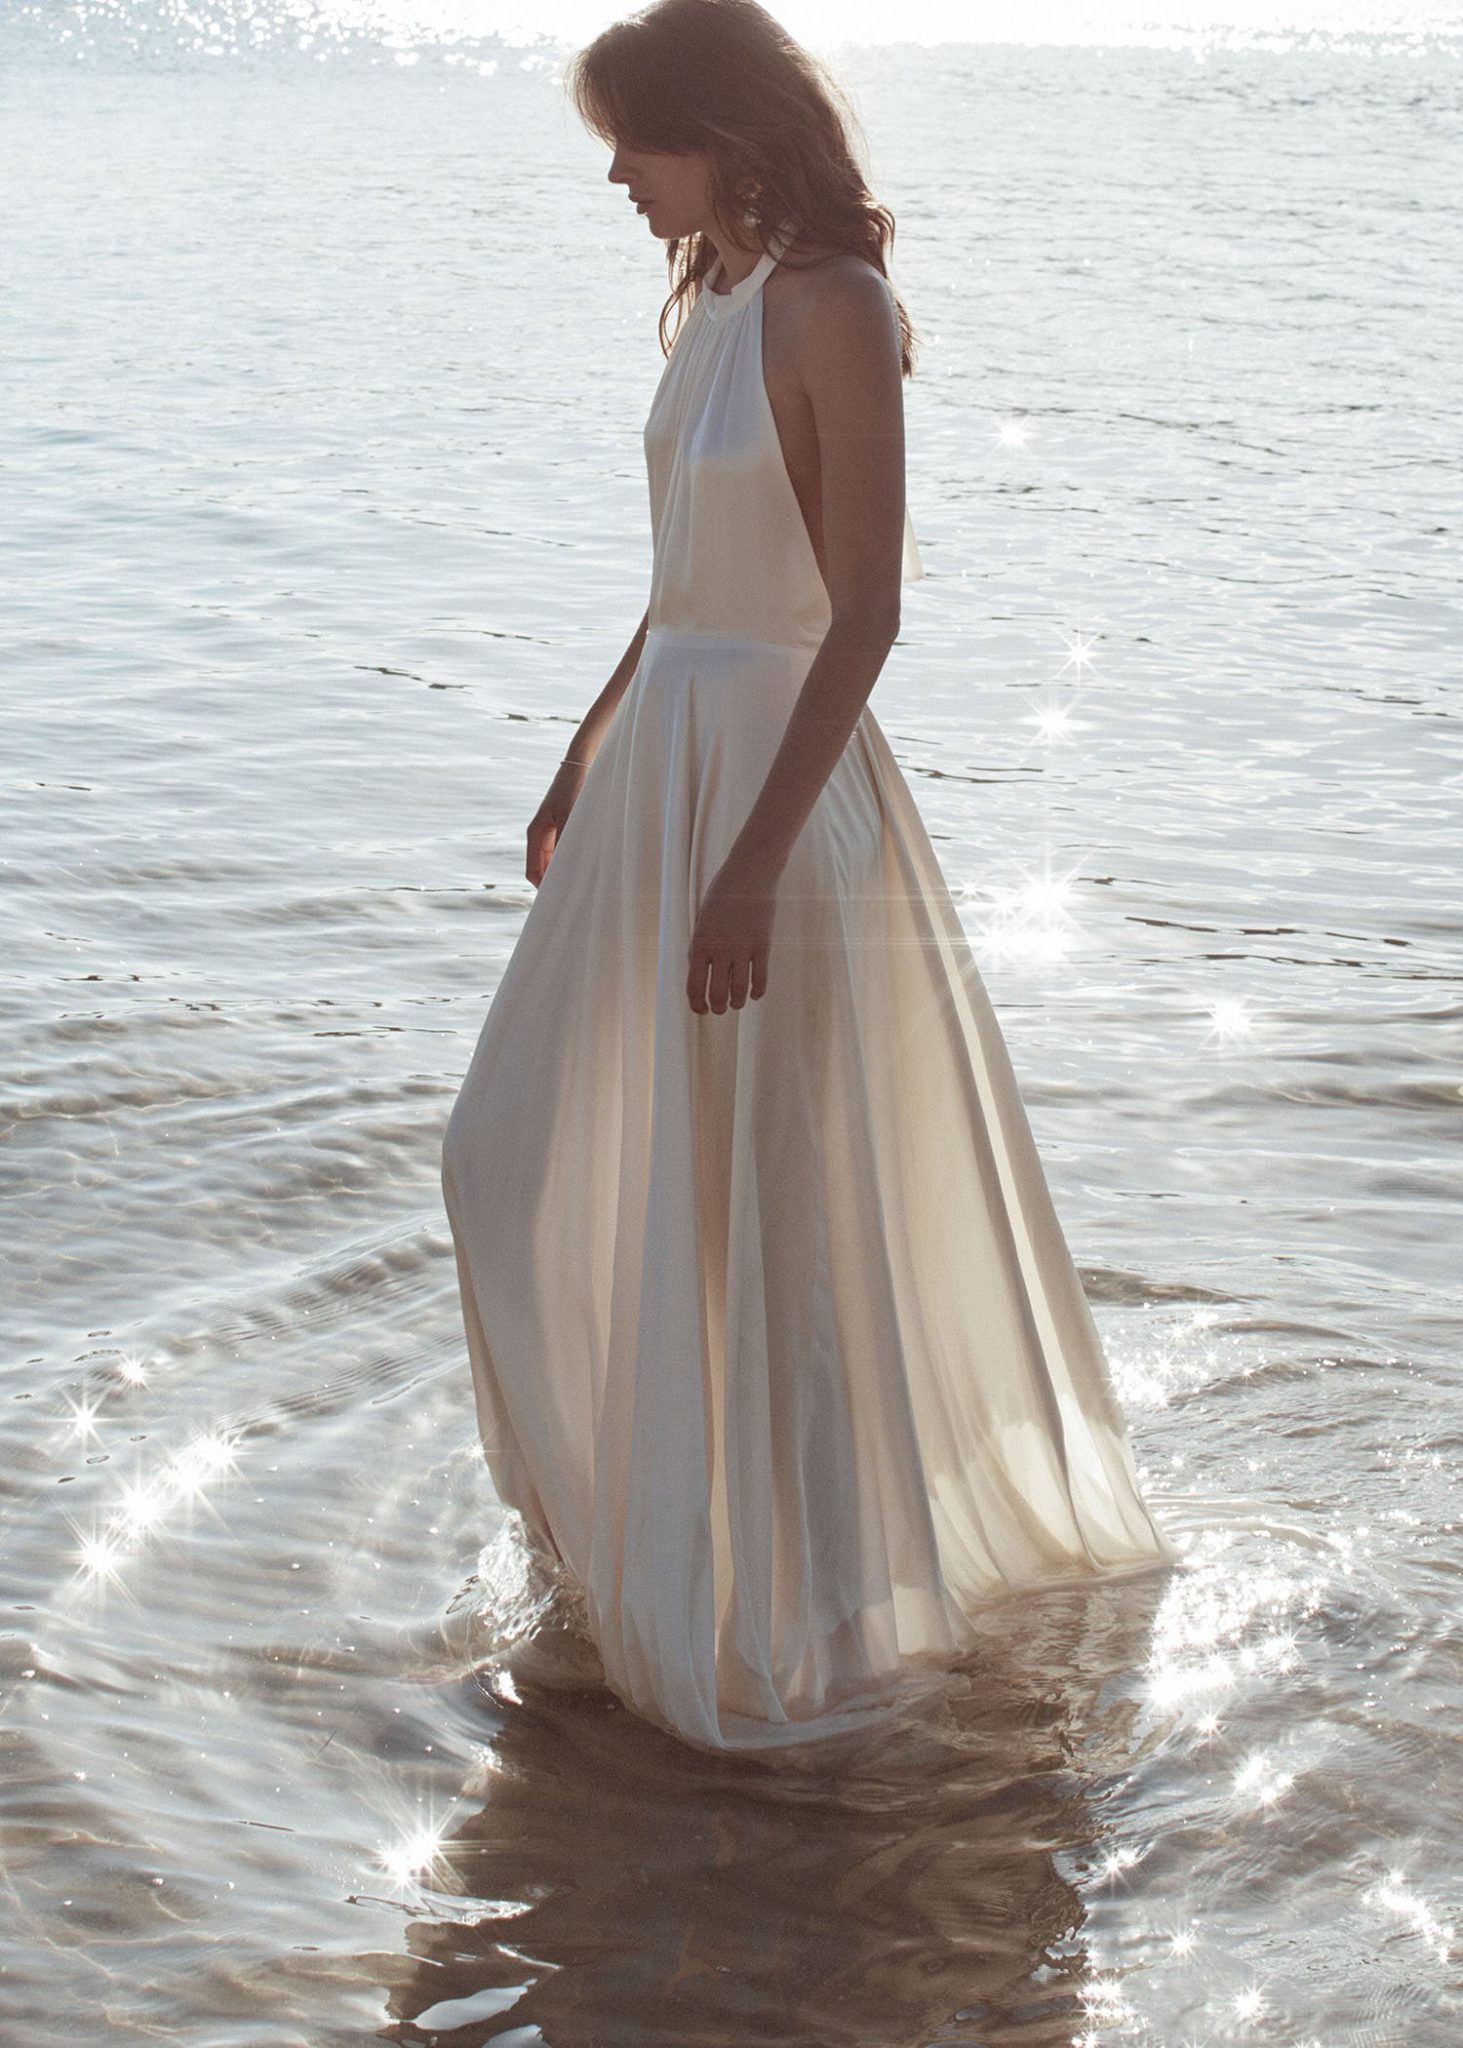 Bridal attire inspiration from & For Love, Ontario-made bridal gown from & For Love, halter neck wedding dress satin